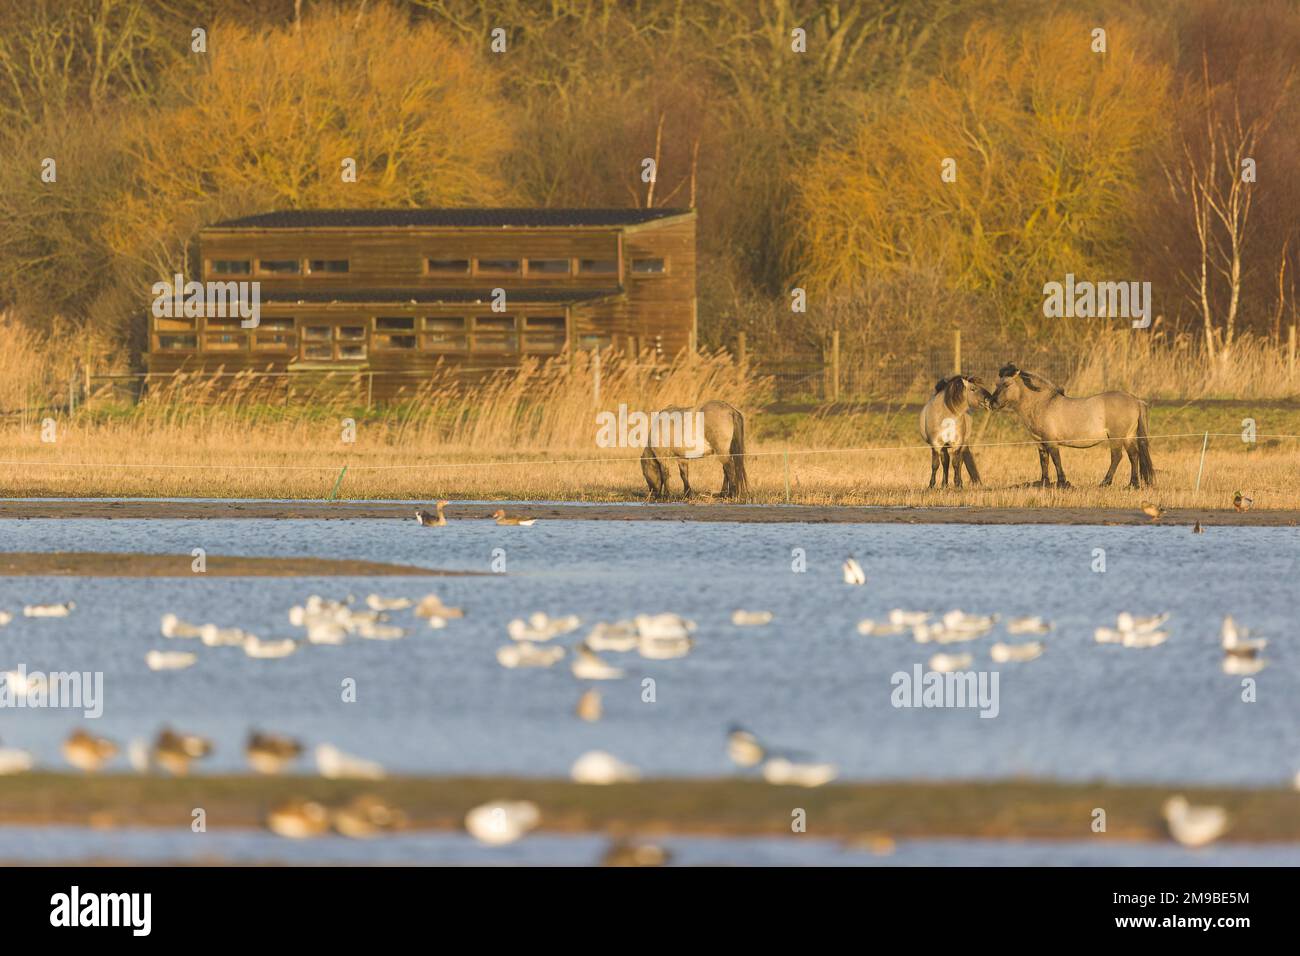 Konik horse Equus caballus gemelli, 3 adults on Scrape with North Hide in background, RSPB Minsmere Nature Reserve, Suffolk, England, January Stock Photo